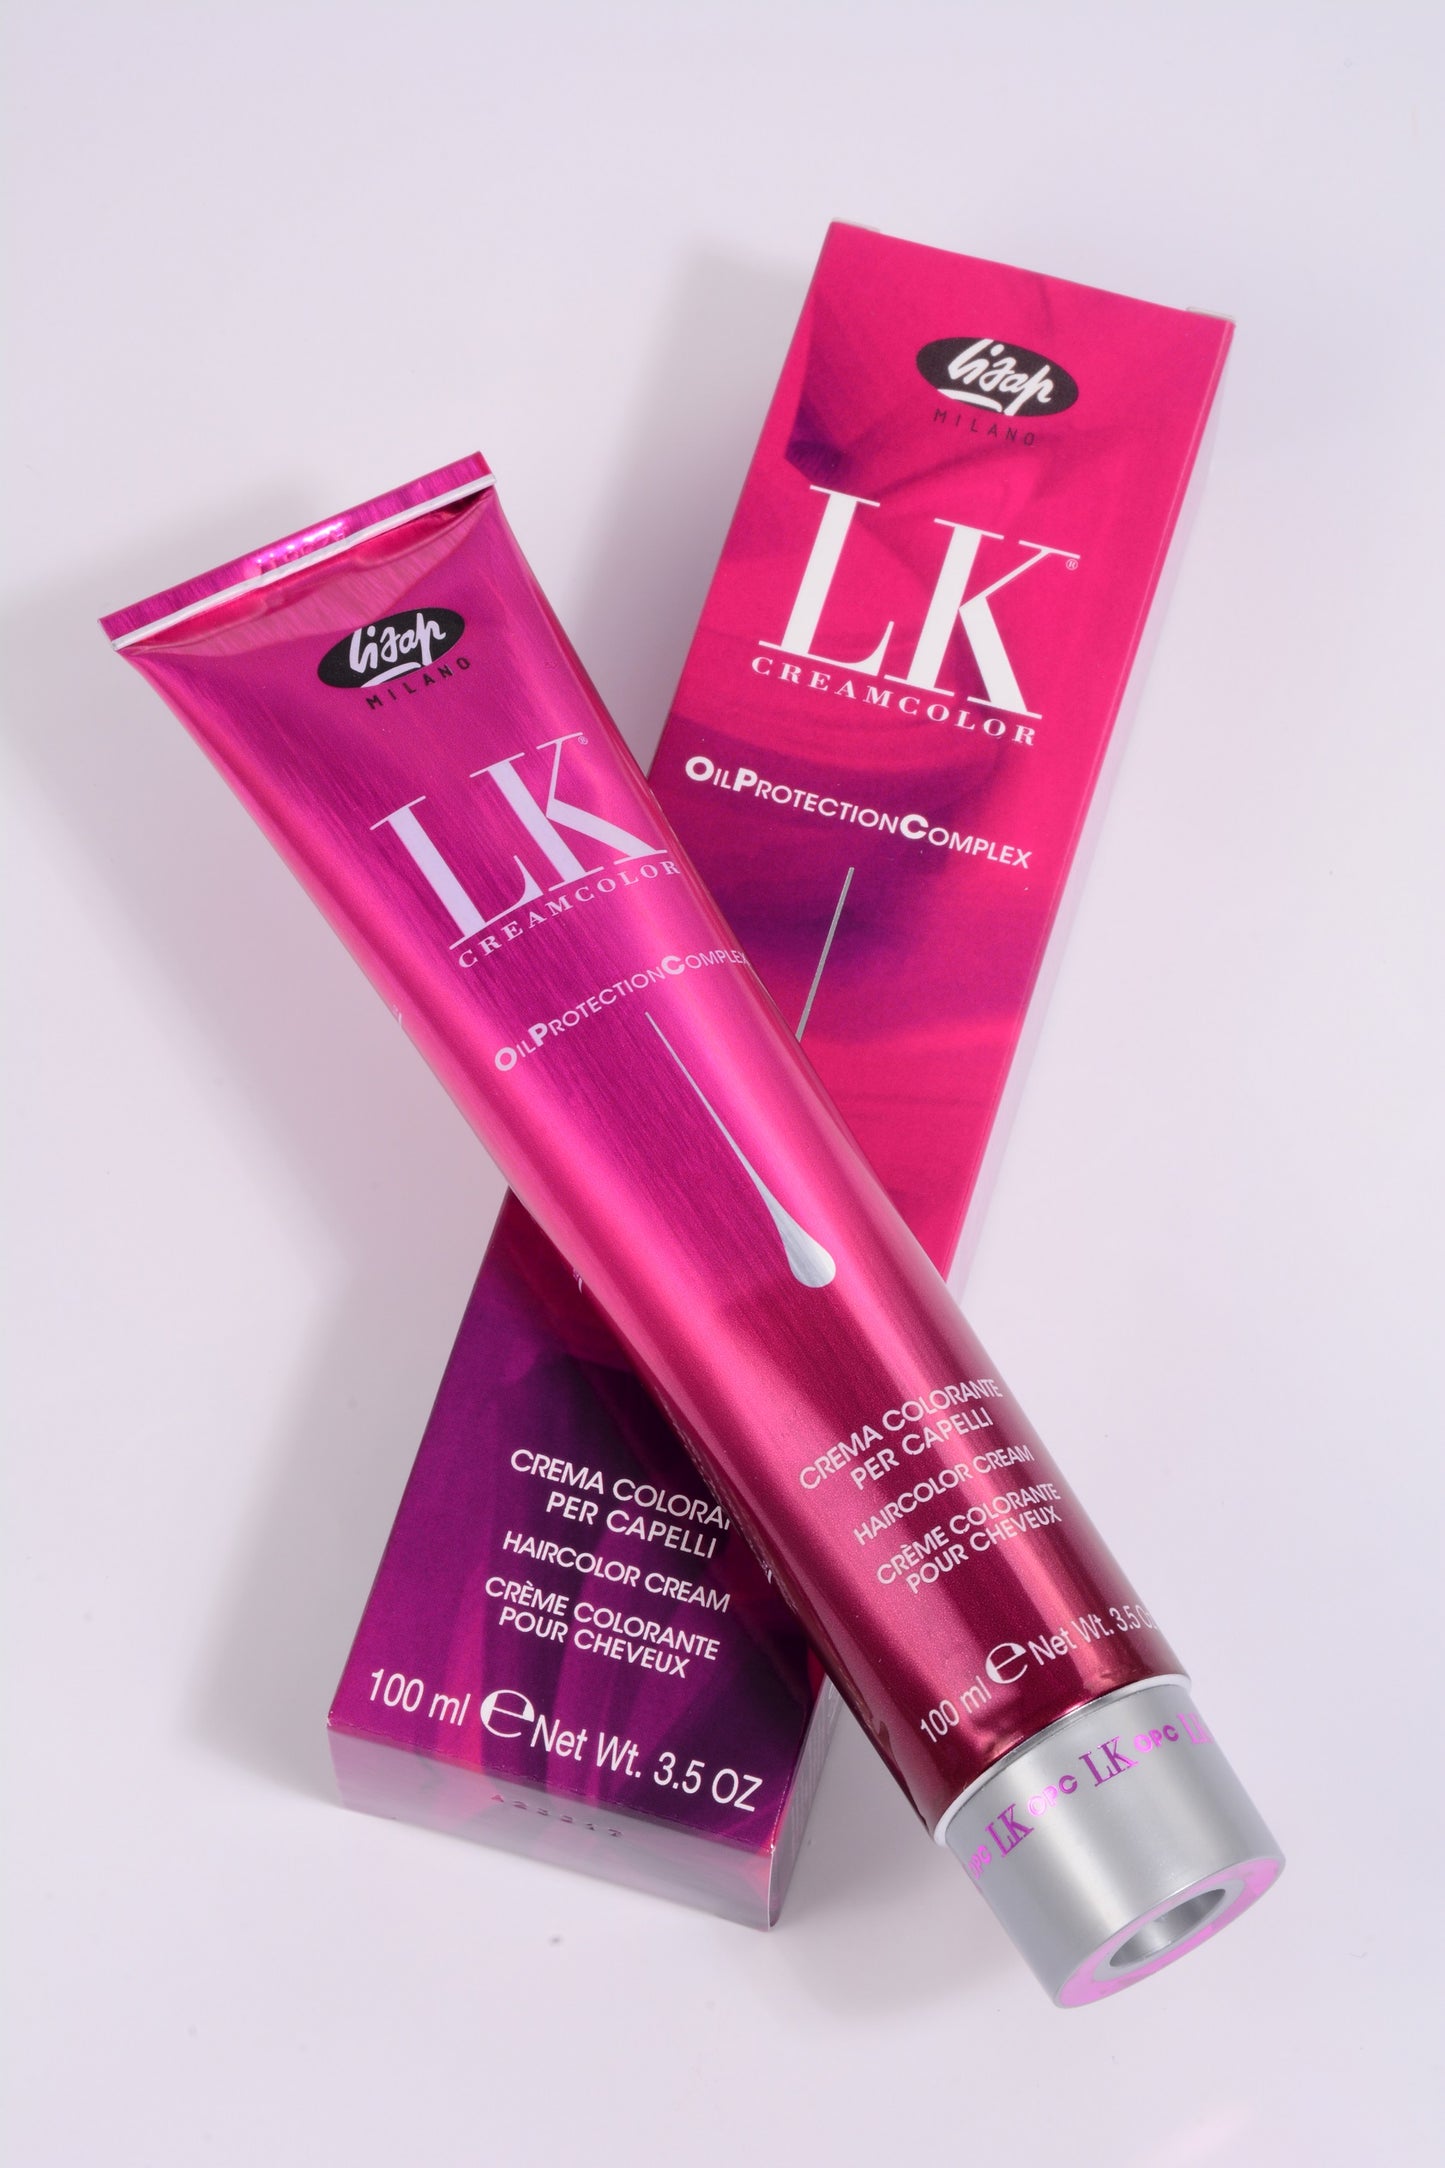 LK Creamcolor 6/2 oil Protection Complex